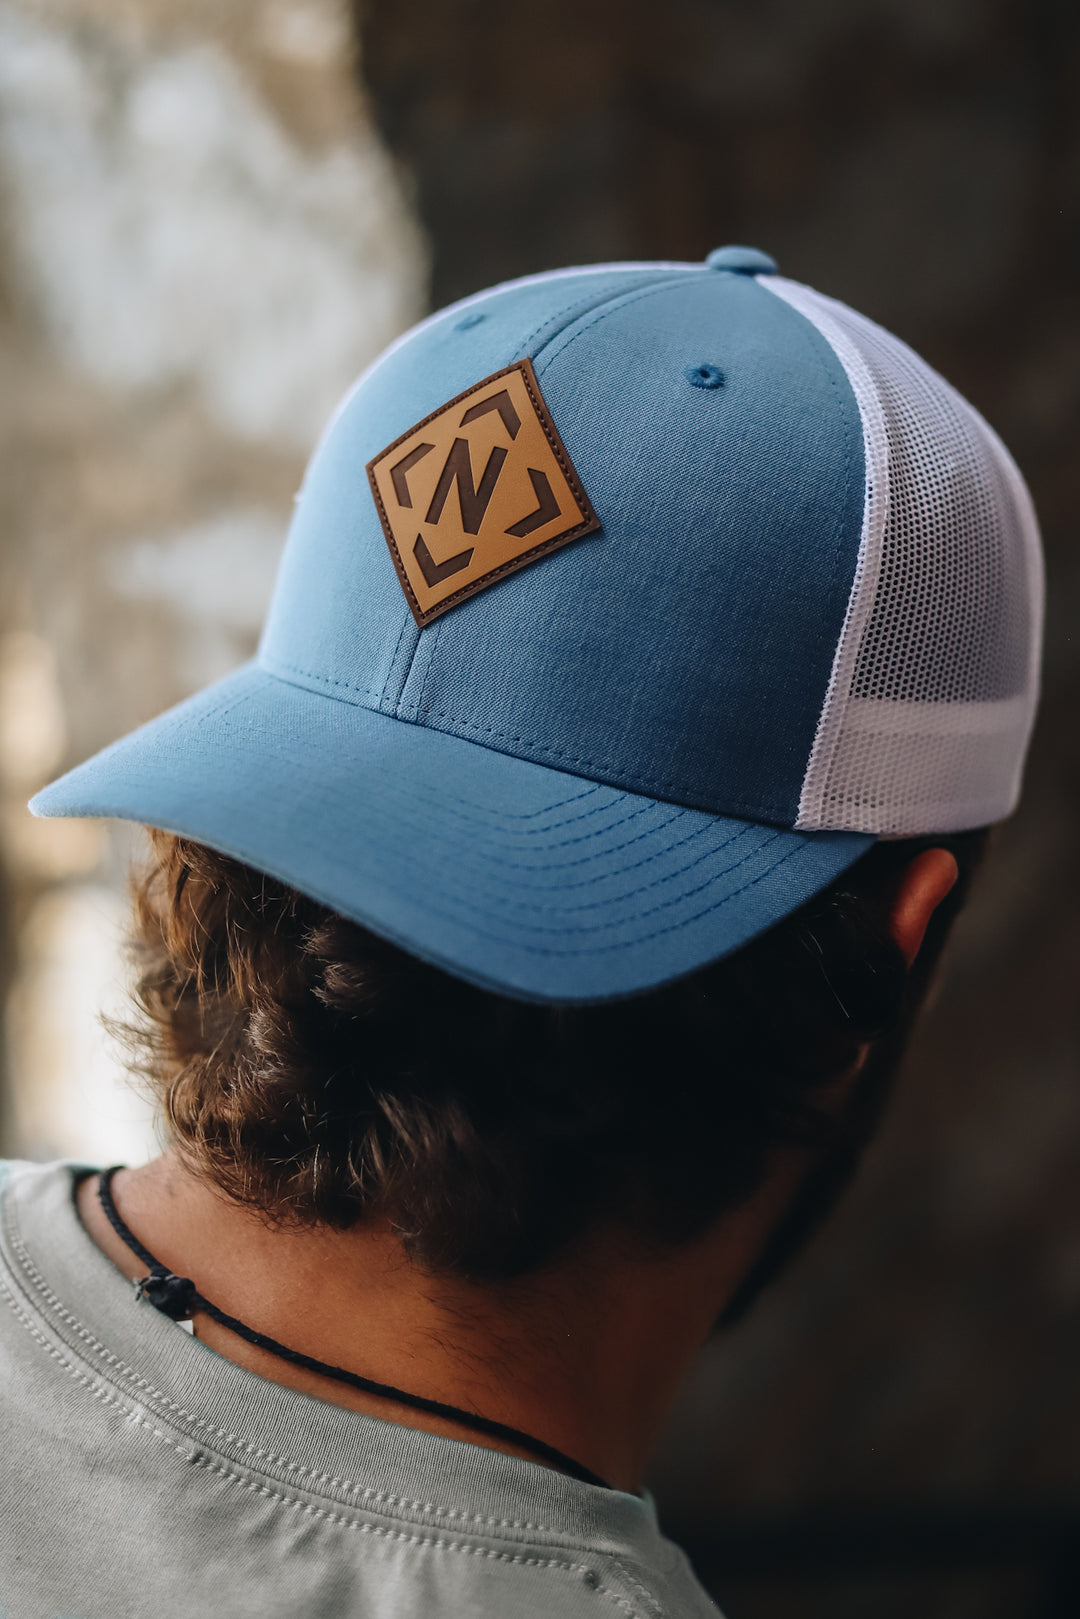 ALL HEADWEAR ICONIC Collection Nash – The